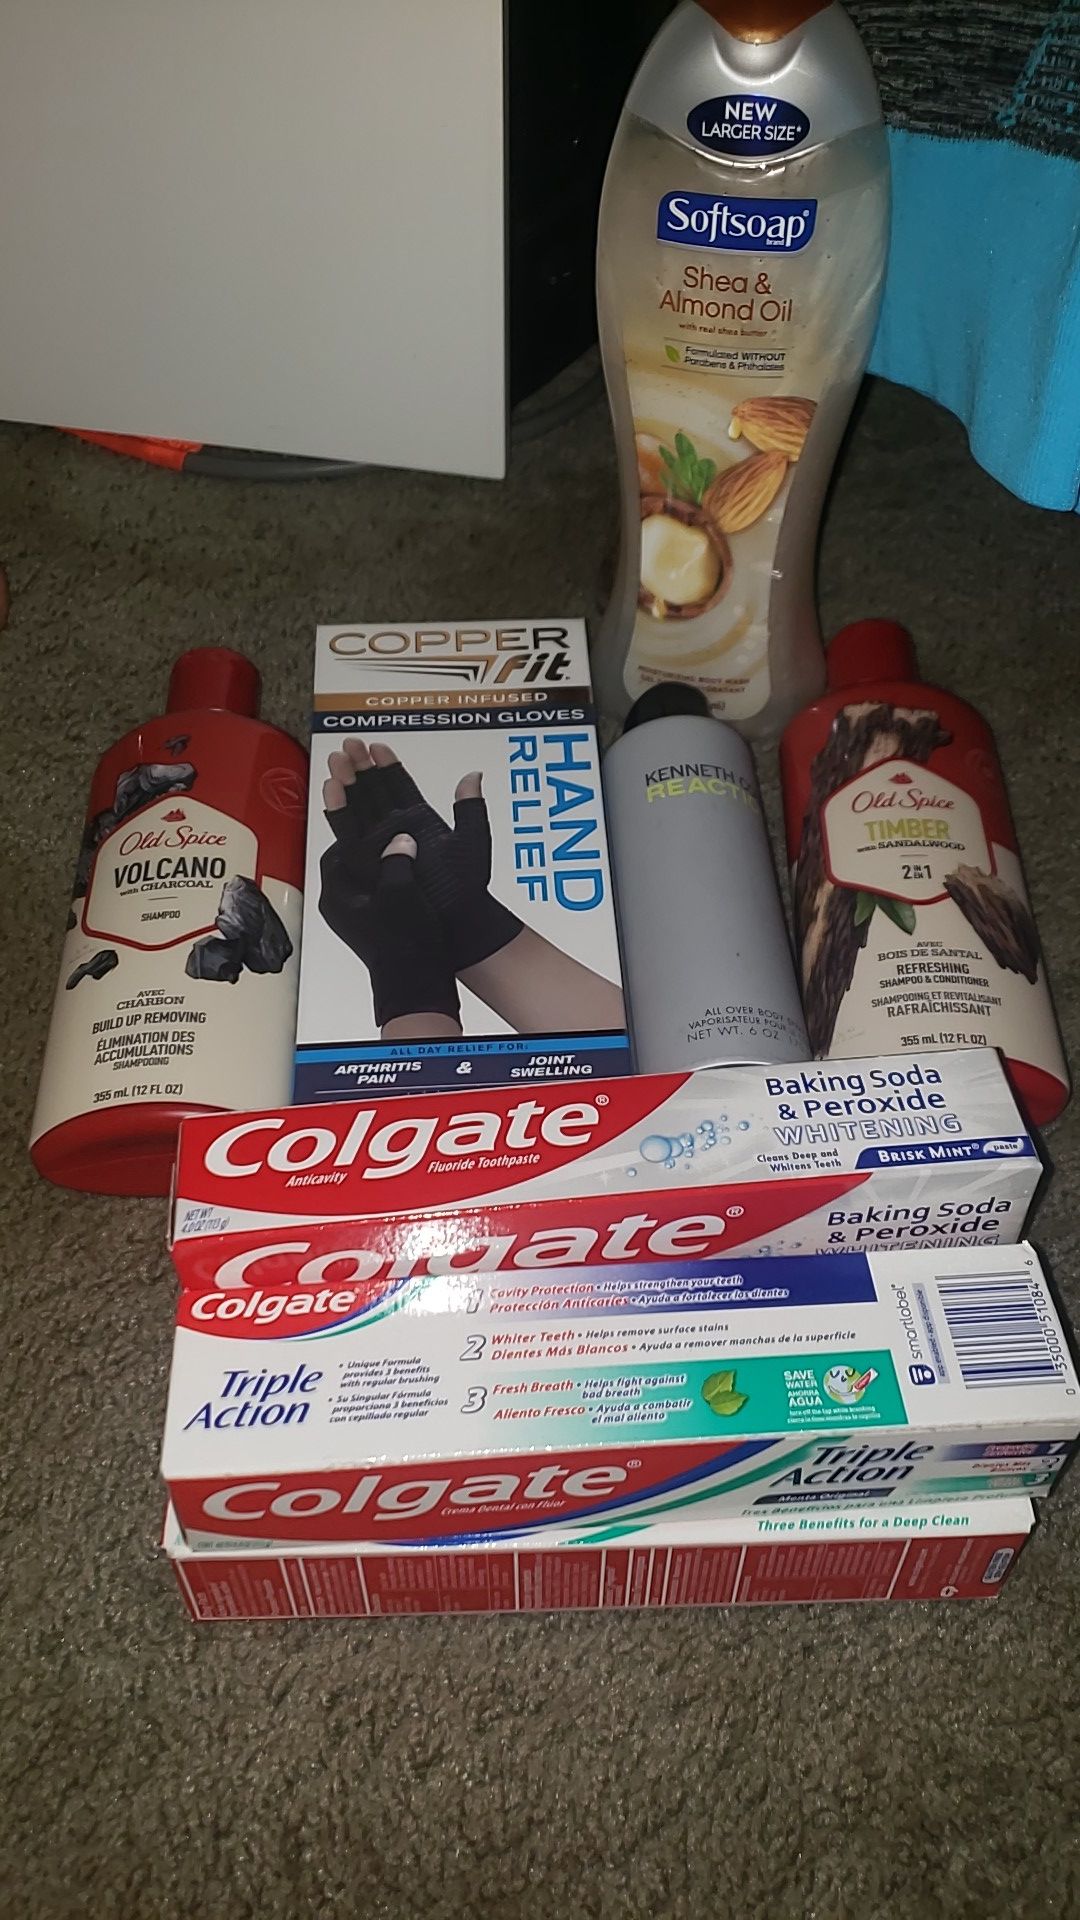 Copper fit old spice 4 colgate Kenneth cole body spray and softsoap body spray